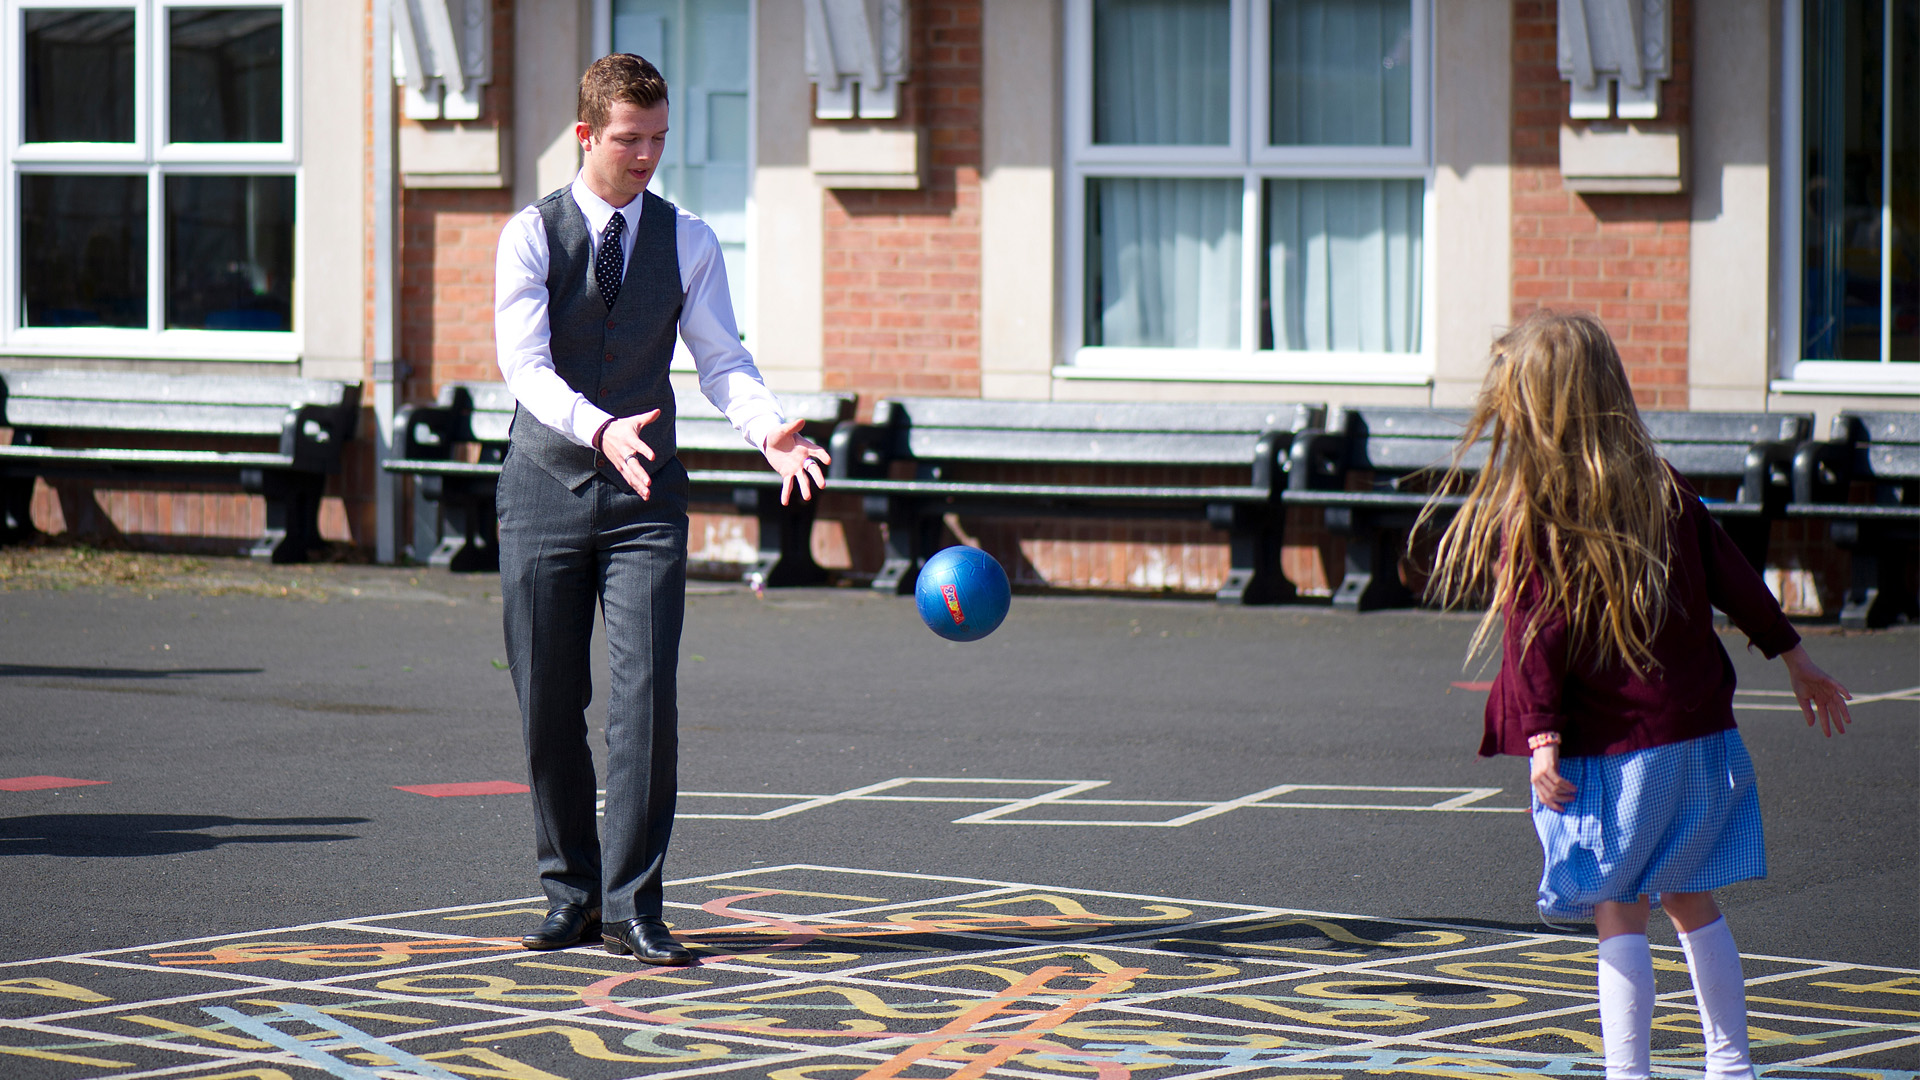 A teacher in a suit and a child with long hair playing with a ball in a playground